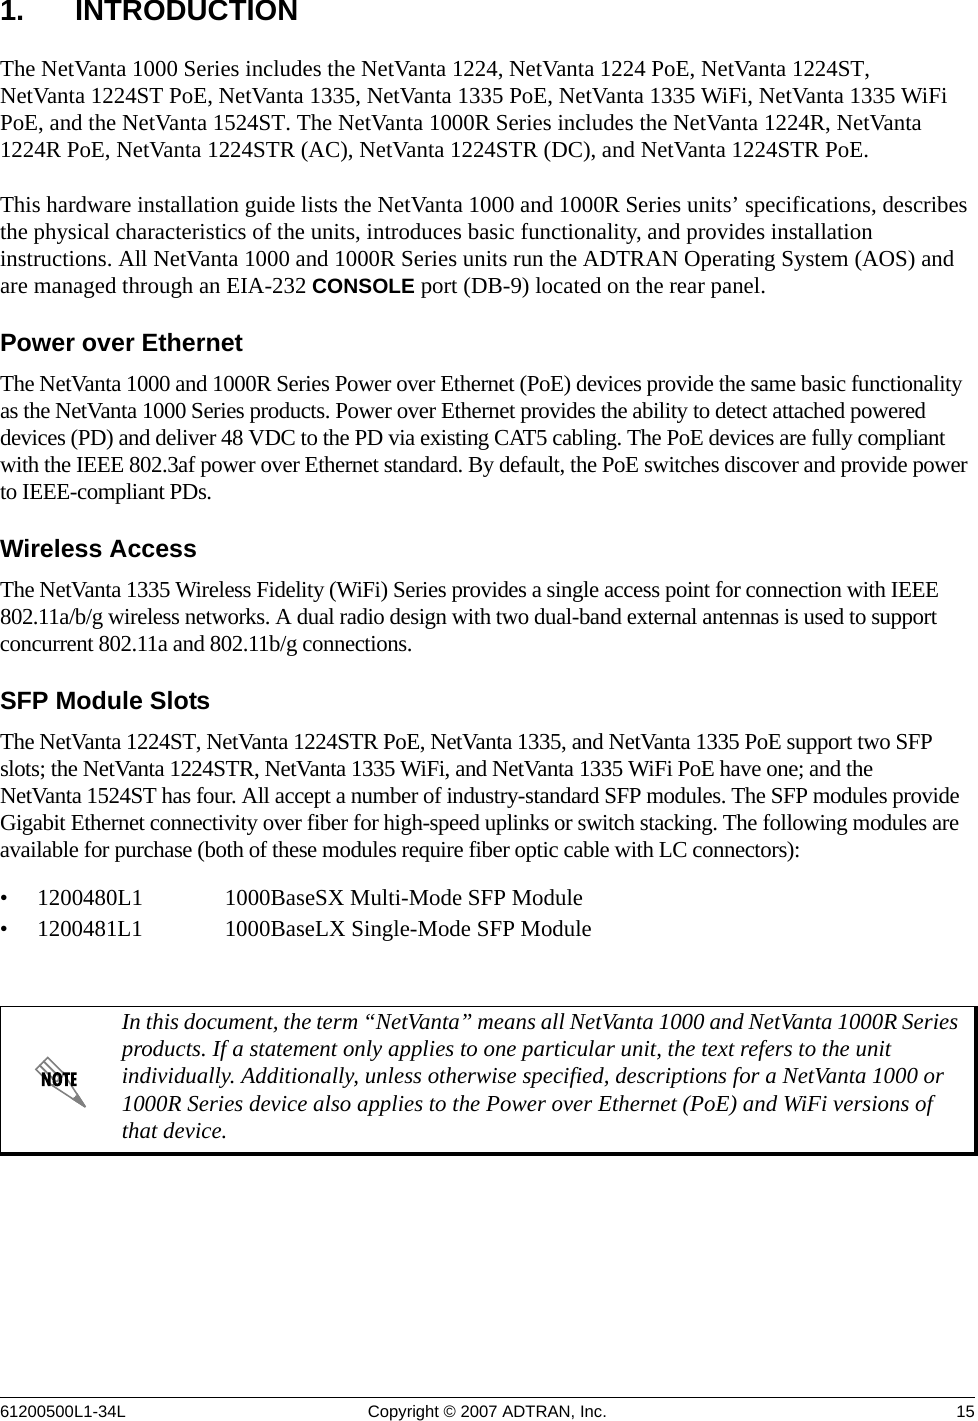 61200500L1-34L Copyright © 2007 ADTRAN, Inc. 151. INTRODUCTIONThe NetVanta 1000 Series includes the NetVanta 1224, NetVanta 1224 PoE, NetVanta 1224ST, NetVanta 1224ST PoE, NetVanta 1335, NetVanta 1335 PoE, NetVanta 1335 WiFi, NetVanta 1335 WiFi PoE, and the NetVanta 1524ST. The NetVanta 1000R Series includes the NetVanta 1224R, NetVanta 1224R PoE, NetVanta 1224STR (AC), NetVanta 1224STR (DC), and NetVanta 1224STR PoE.This hardware installation guide lists the NetVanta 1000 and 1000R Series units’ specifications, describes the physical characteristics of the units, introduces basic functionality, and provides installation instructions. All NetVanta 1000 and 1000R Series units run the ADTRAN Operating System (AOS) and are managed through an EIA-232 CONSOLE port (DB-9) located on the rear panel.Power over EthernetThe NetVanta 1000 and 1000R Series Power over Ethernet (PoE) devices provide the same basic functionality as the NetVanta 1000 Series products. Power over Ethernet provides the ability to detect attached powered devices (PD) and deliver 48 VDC to the PD via existing CAT5 cabling. The PoE devices are fully compliant with the IEEE 802.3af power over Ethernet standard. By default, the PoE switches discover and provide power to IEEE-compliant PDs. Wireless AccessThe NetVanta 1335 Wireless Fidelity (WiFi) Series provides a single access point for connection with IEEE 802.11a/b/g wireless networks. A dual radio design with two dual-band external antennas is used to support concurrent 802.11a and 802.11b/g connections.SFP Module SlotsThe NetVanta 1224ST, NetVanta 1224STR PoE, NetVanta 1335, and NetVanta 1335 PoE support two SFP slots; the NetVanta 1224STR, NetVanta 1335 WiFi, and NetVanta 1335 WiFi PoE have one; and the NetVanta 1524ST has four. All accept a number of industry-standard SFP modules. The SFP modules provide Gigabit Ethernet connectivity over fiber for high-speed uplinks or switch stacking. The following modules are available for purchase (both of these modules require fiber optic cable with LC connectors):• 1200480L1 1000BaseSX Multi-Mode SFP Module• 1200481L1 1000BaseLX Single-Mode SFP ModuleIn this document, the term “NetVanta” means all NetVanta 1000 and NetVanta 1000R Series products. If a statement only applies to one particular unit, the text refers to the unit individually. Additionally, unless otherwise specified, descriptions for a NetVanta 1000 or 1000R Series device also applies to the Power over Ethernet (PoE) and WiFi versions of that device.